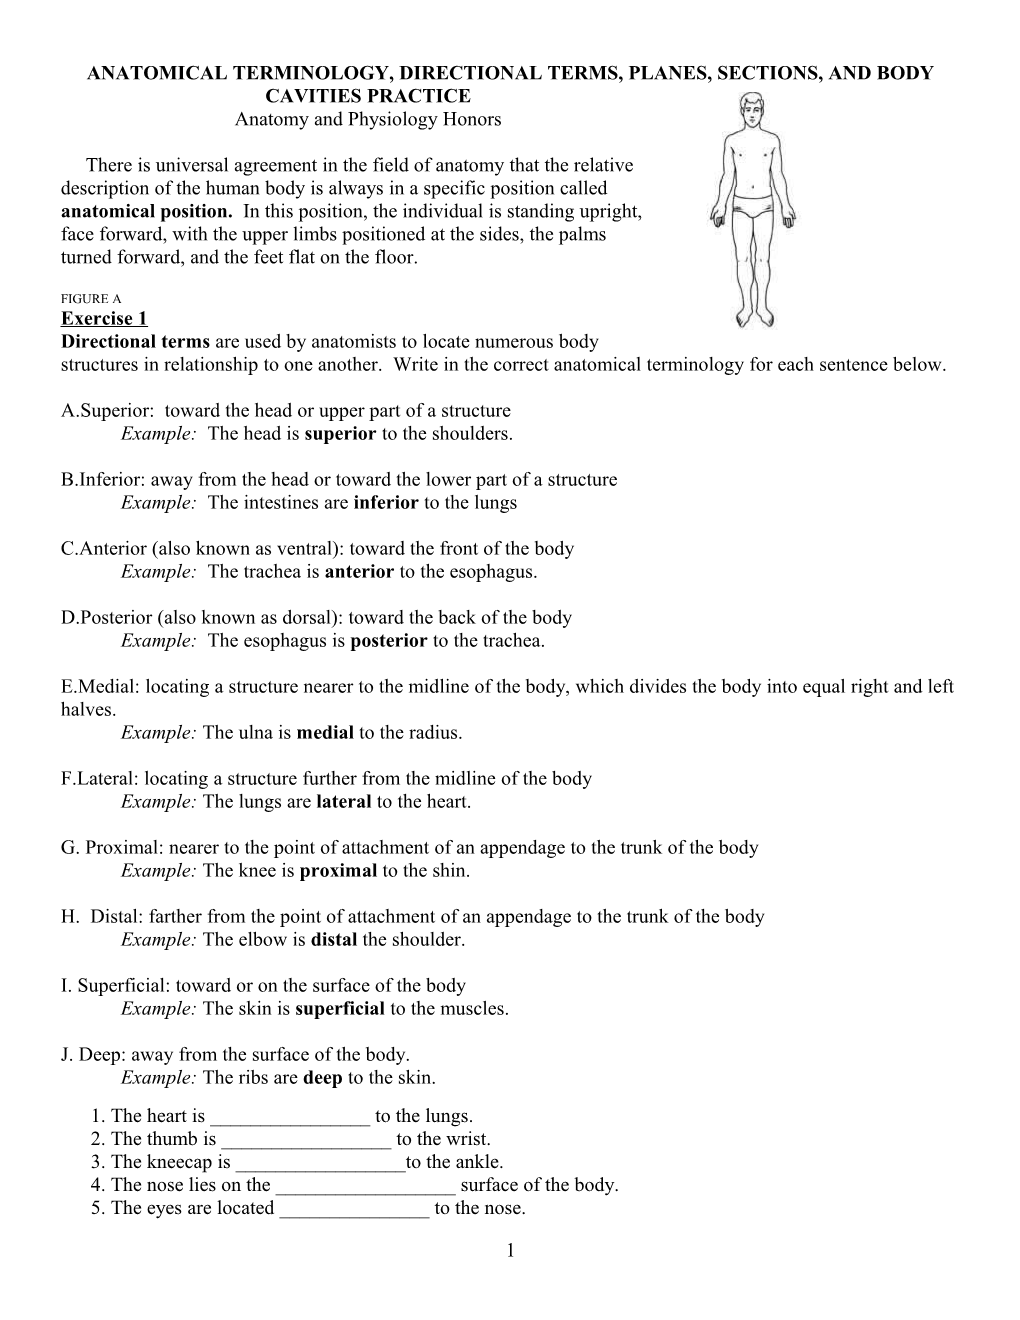 Anatomical Terminology, Directional Terms, Planes, Sections, and Body Cavities